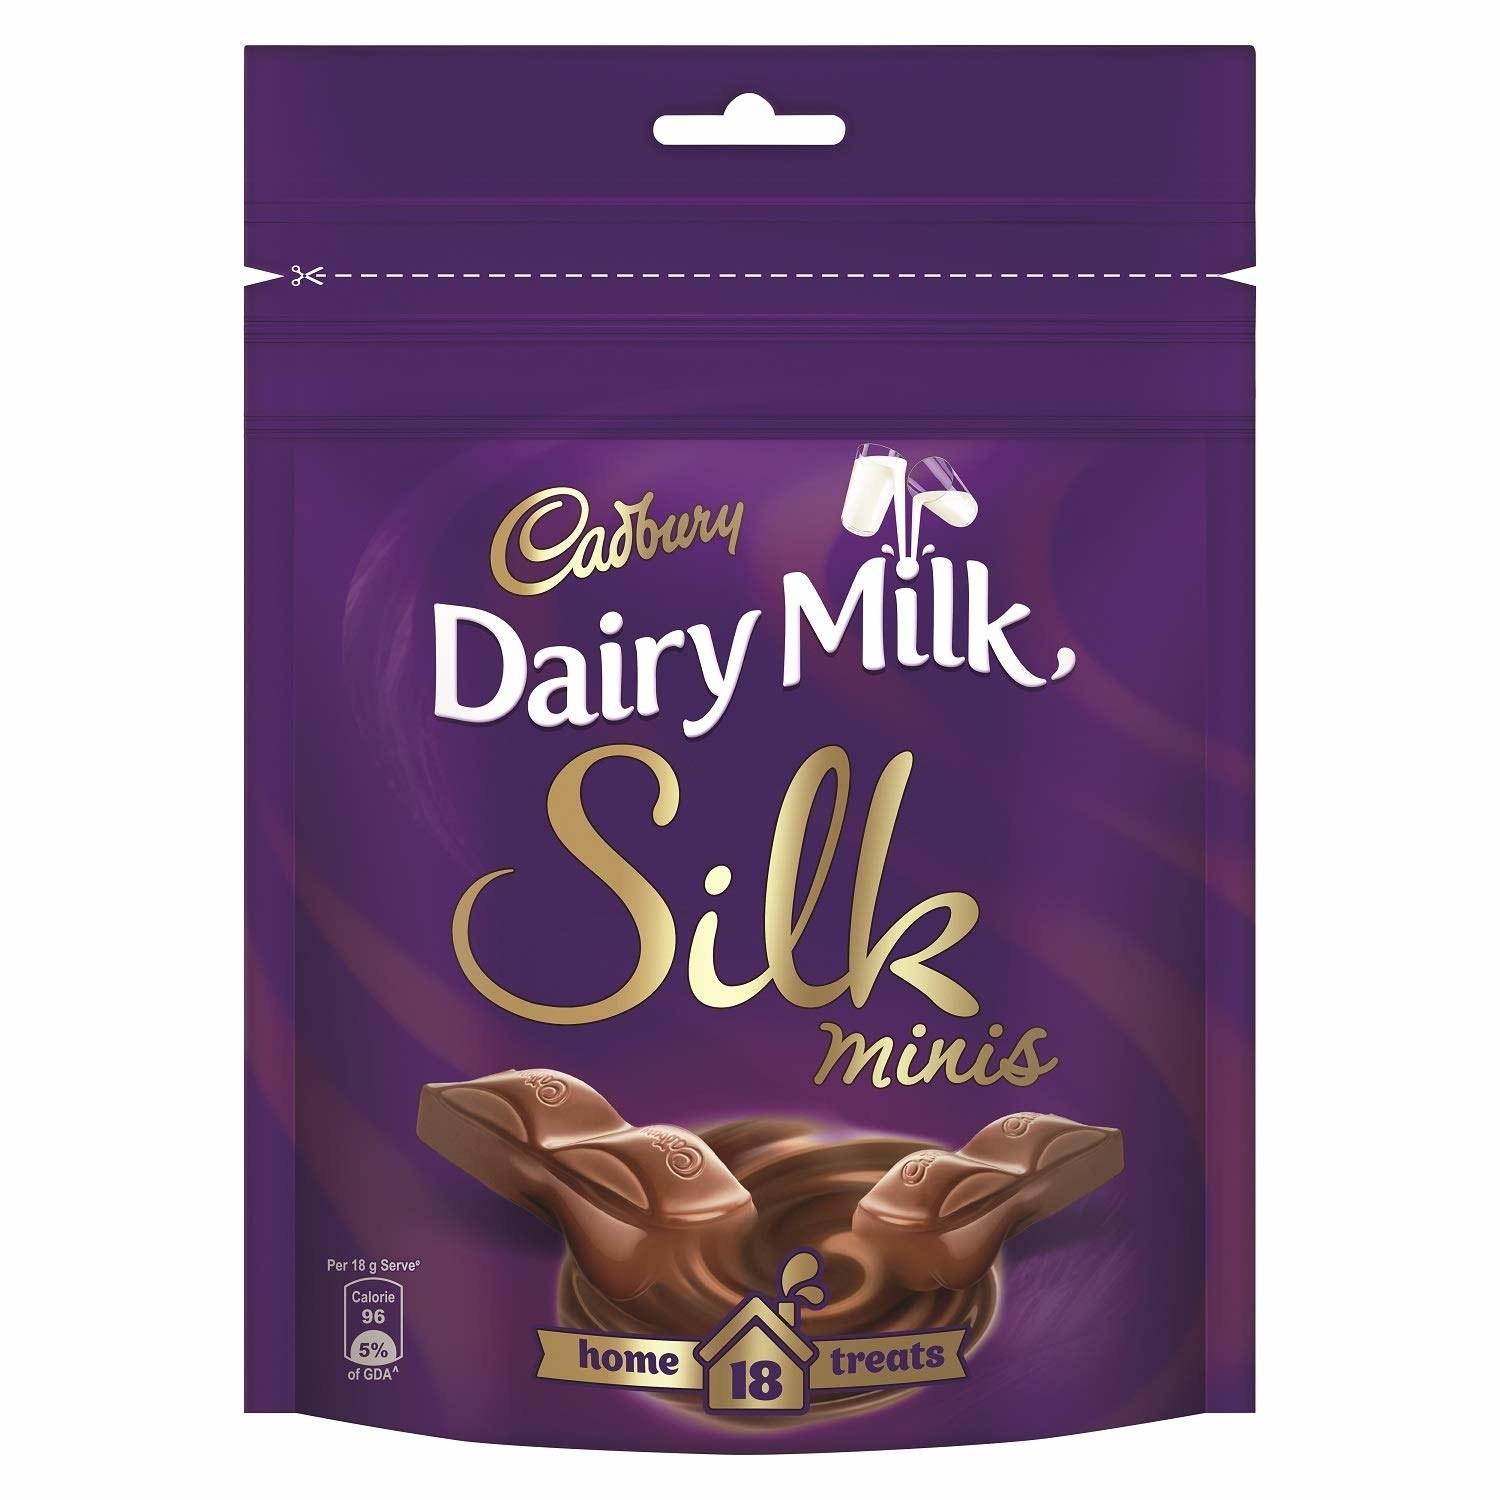 Packaging of the Silk chocolate minis